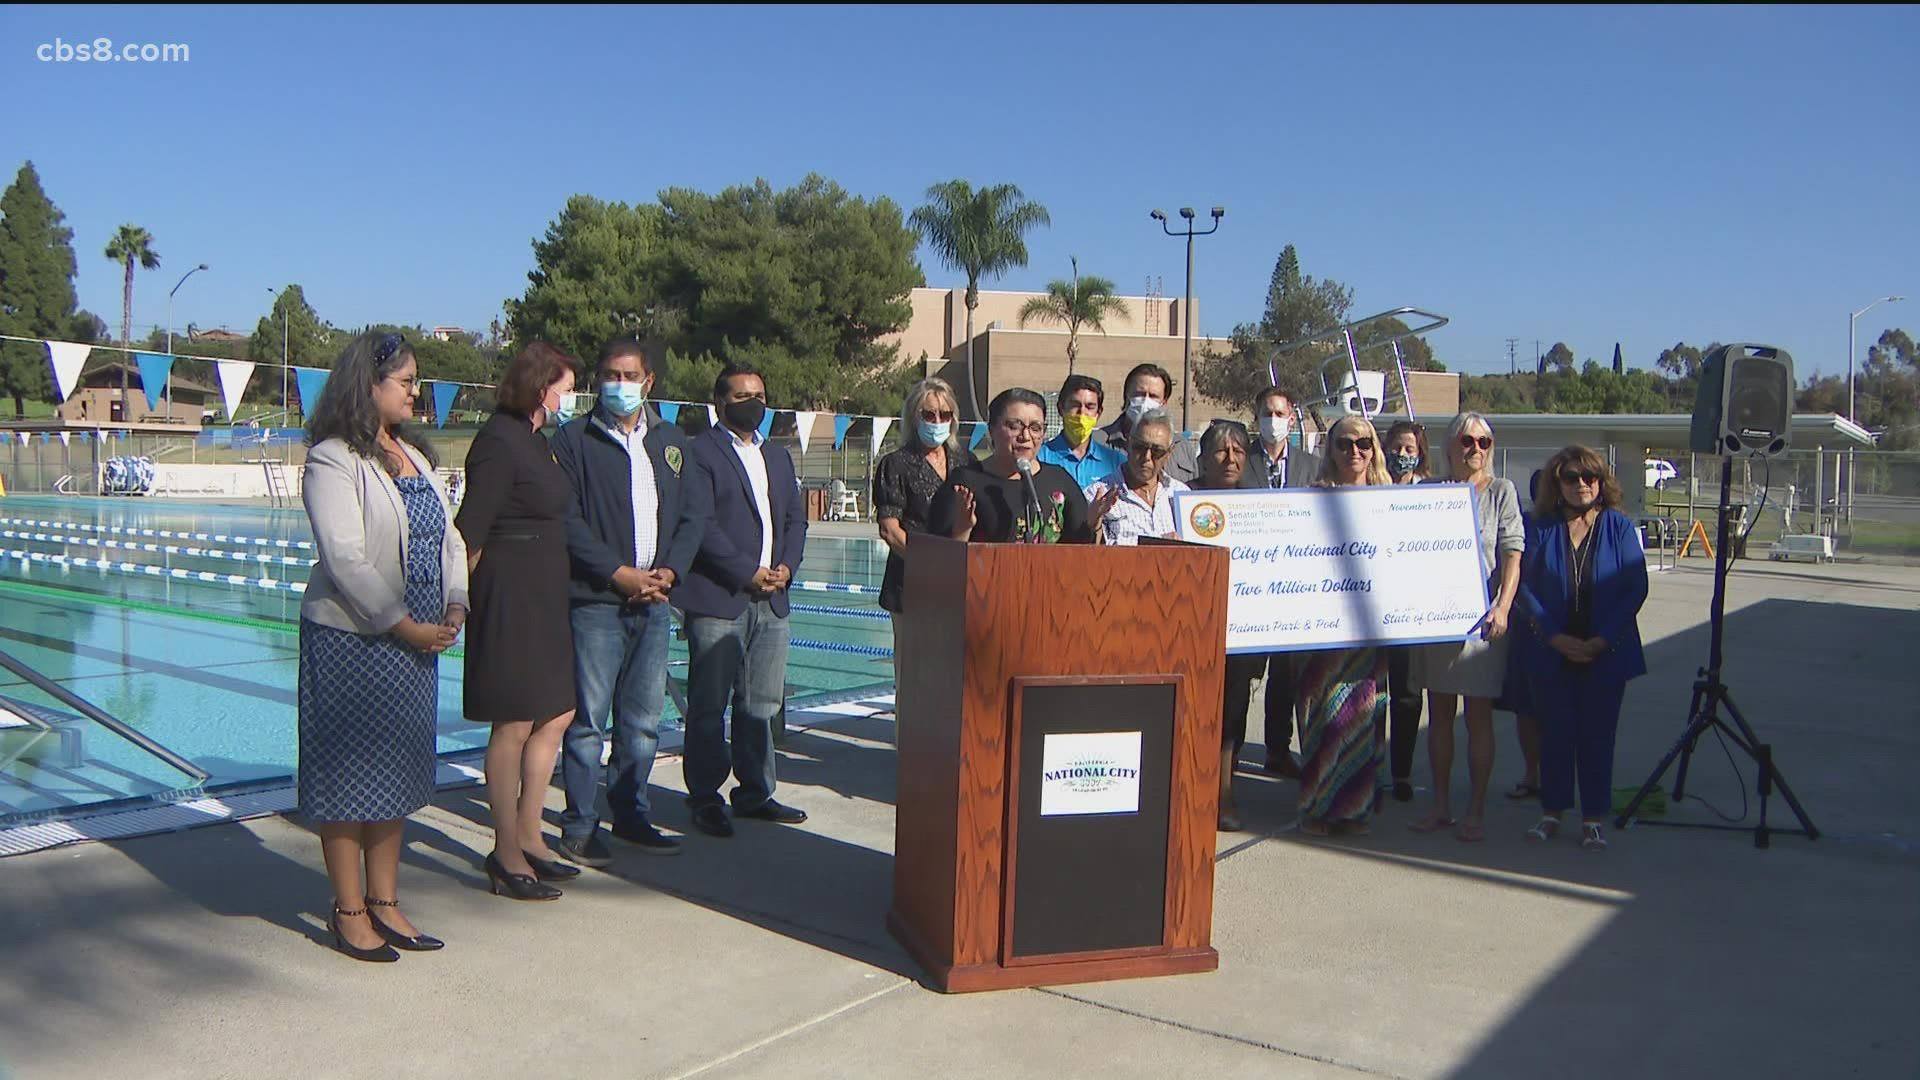 Much needed upgrades are coming to a South Bay pool that is 63-years-old. Two state senators presented a $2 million check to fix National City's Las Palmas Pool.